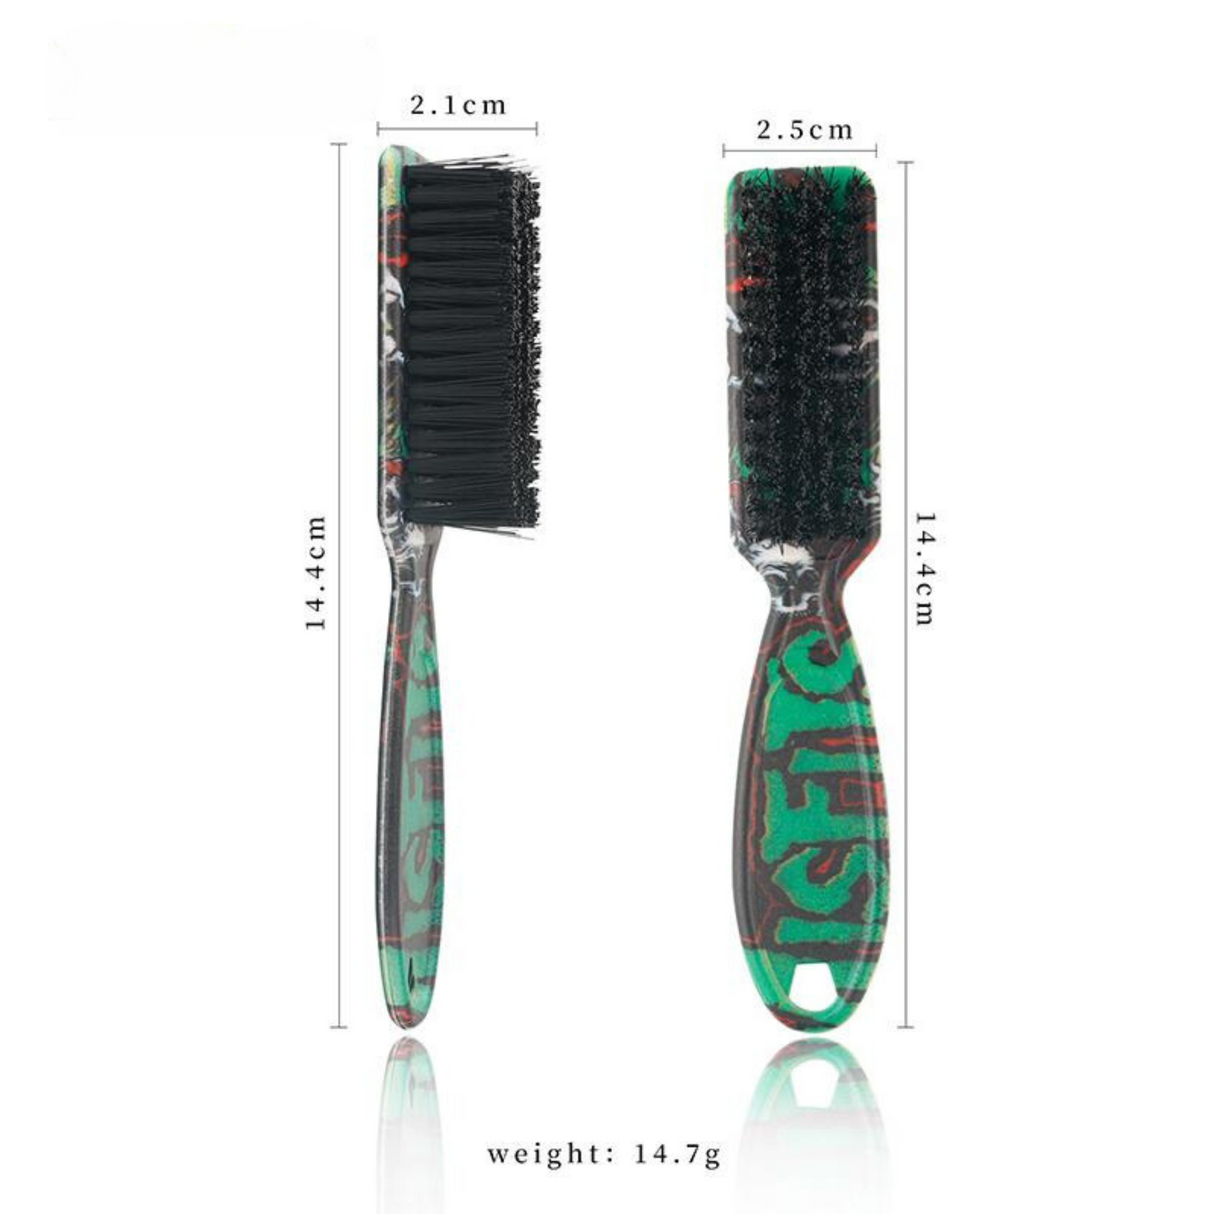 Barber Style 2-in-1 Brush Comb